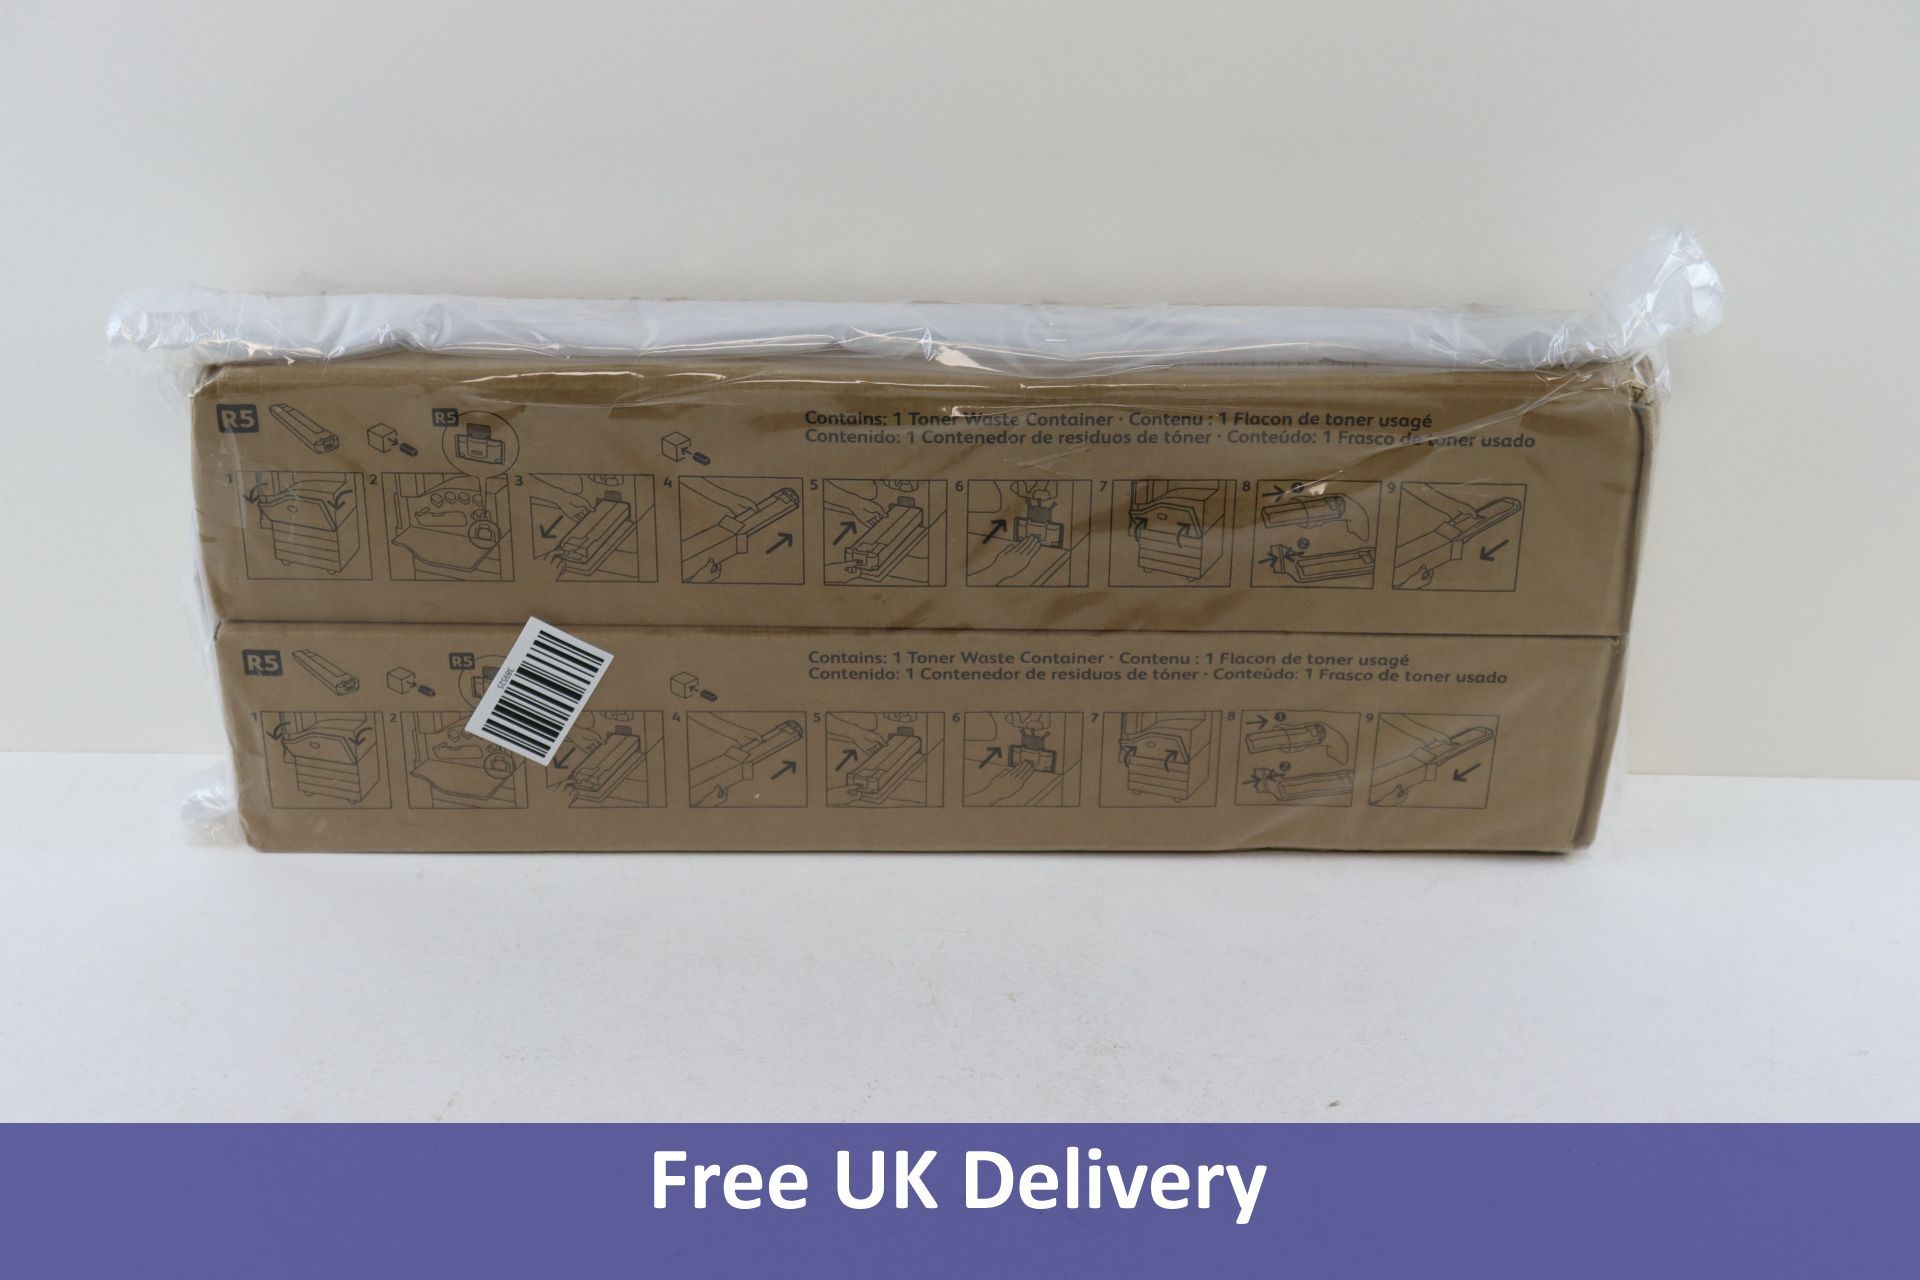 Two Xerox WorkCentre 7425, 7428, 7435, Genuine Waste Toner Container 008R13061, 108R00865